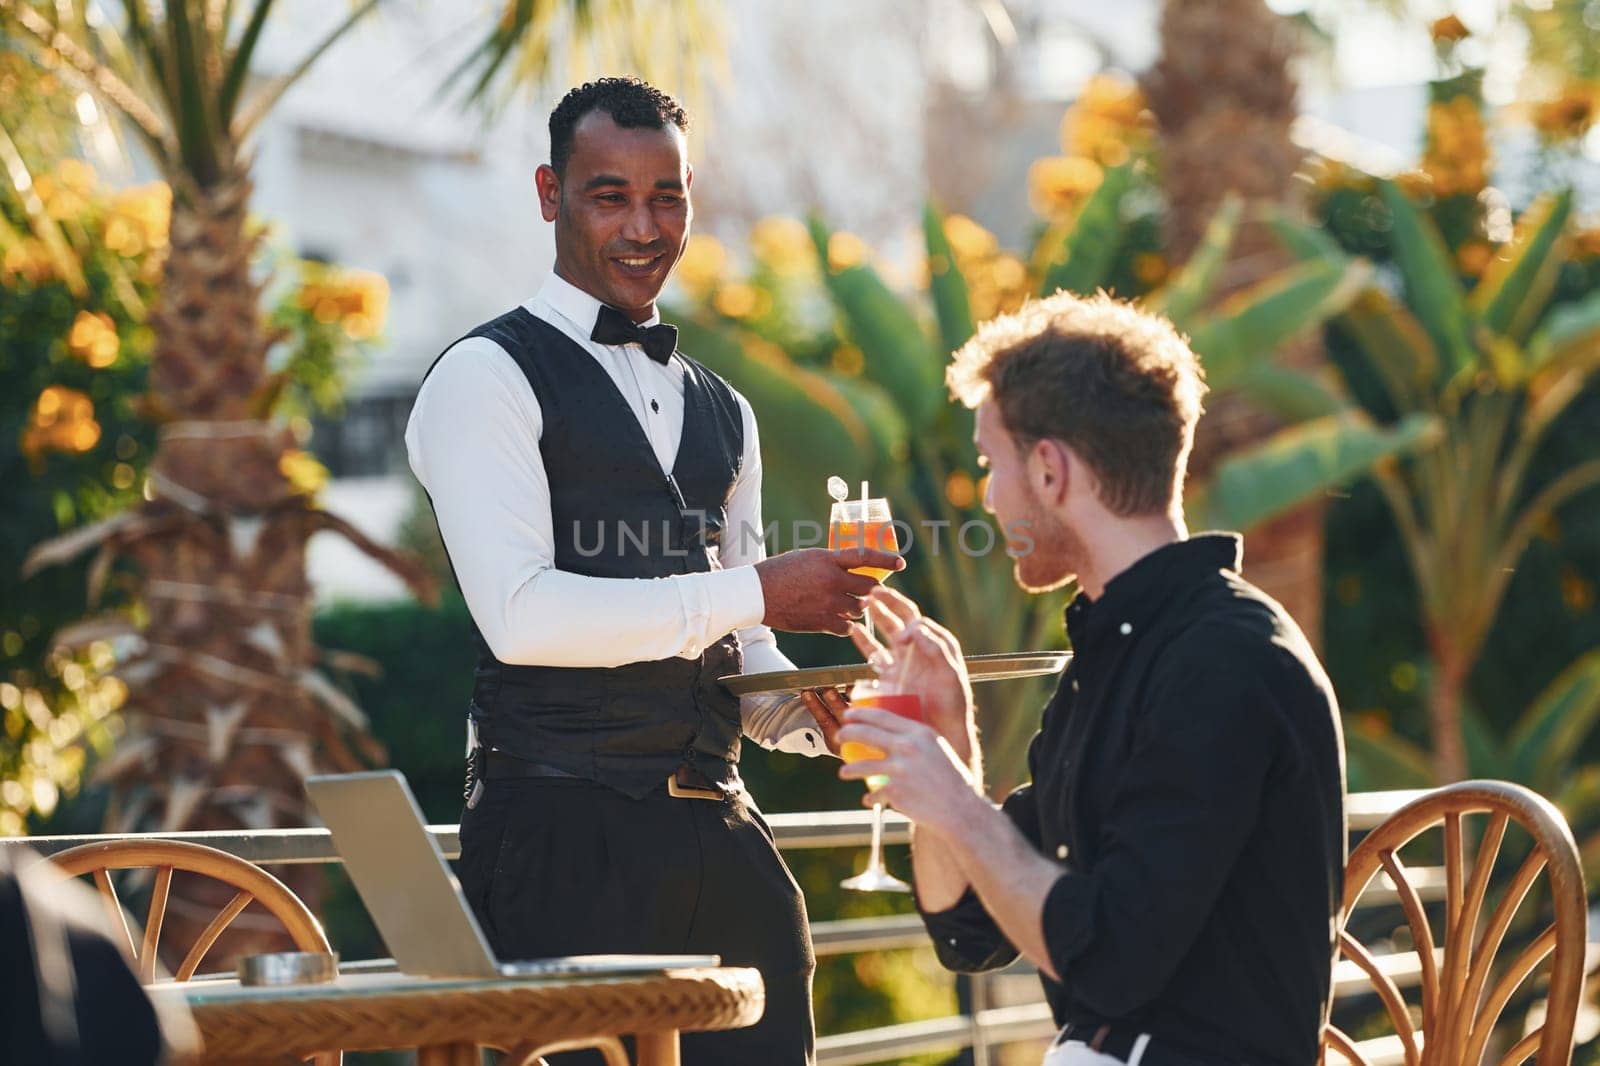 Serviced by waiter. Young man is outdoors at sunny daytime. Concept of vacation by Standret